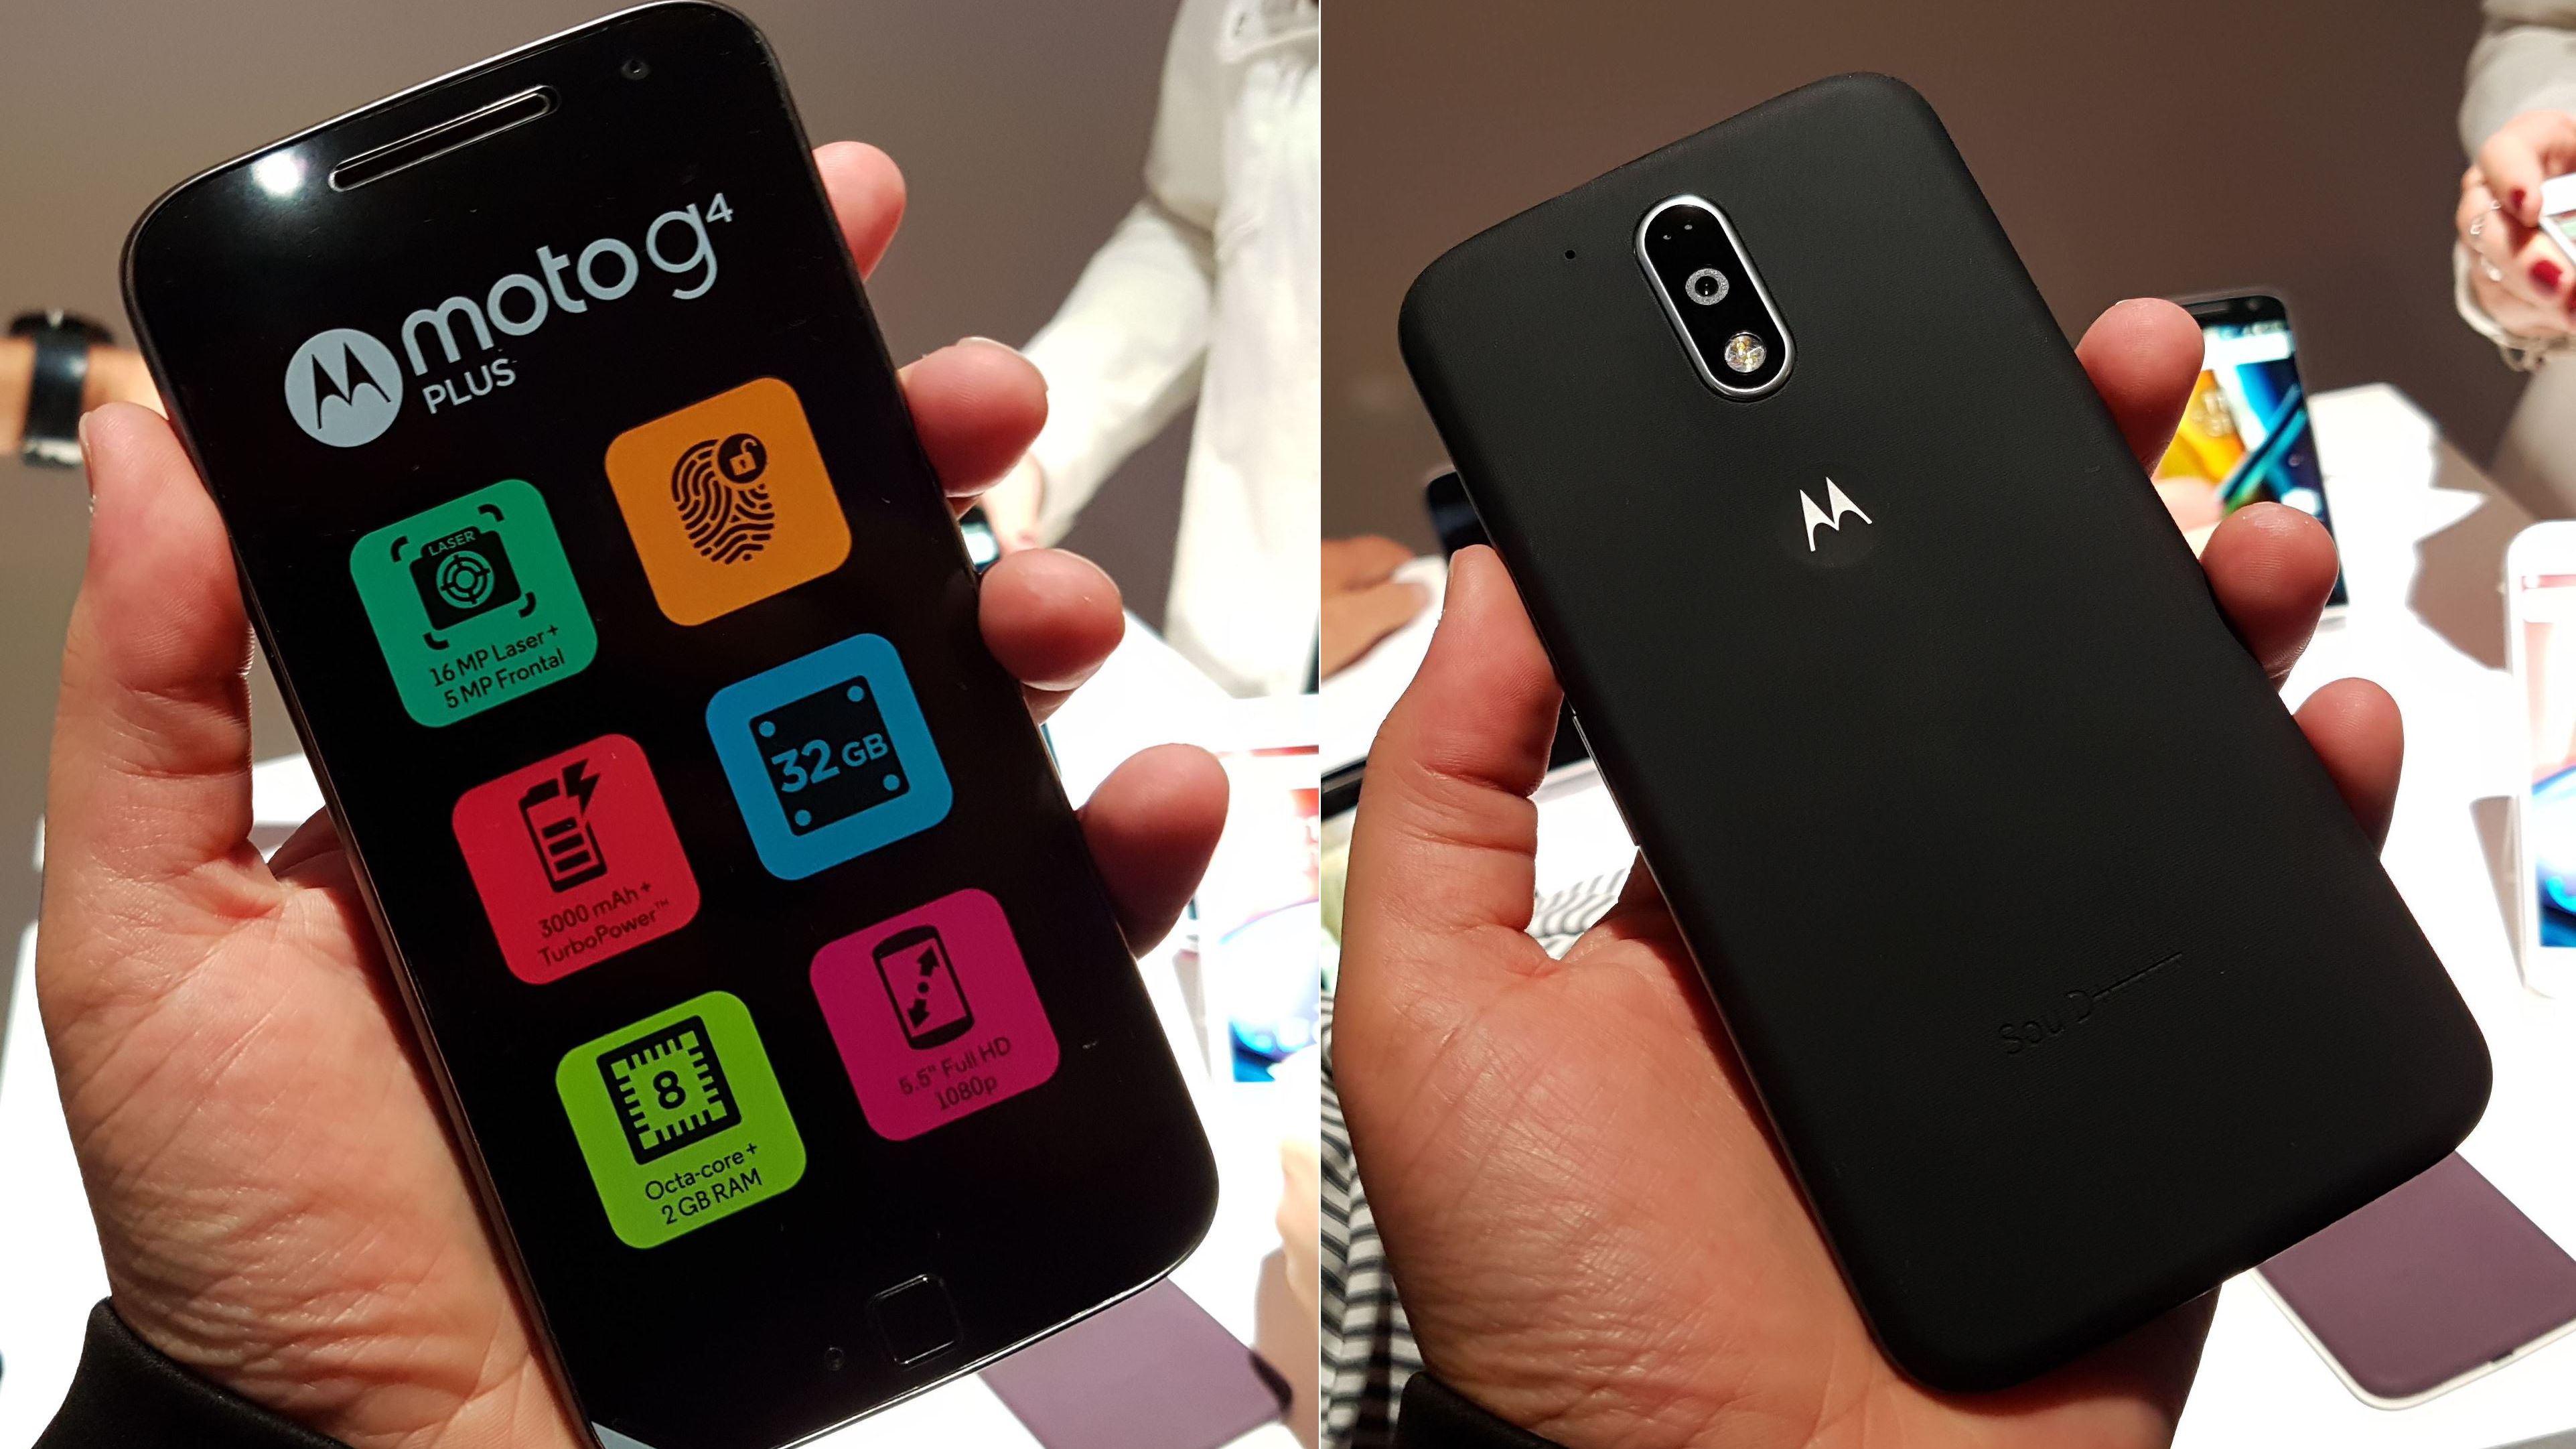 Moto G4 Play Android 7.1.1 Nougat: What's New? 